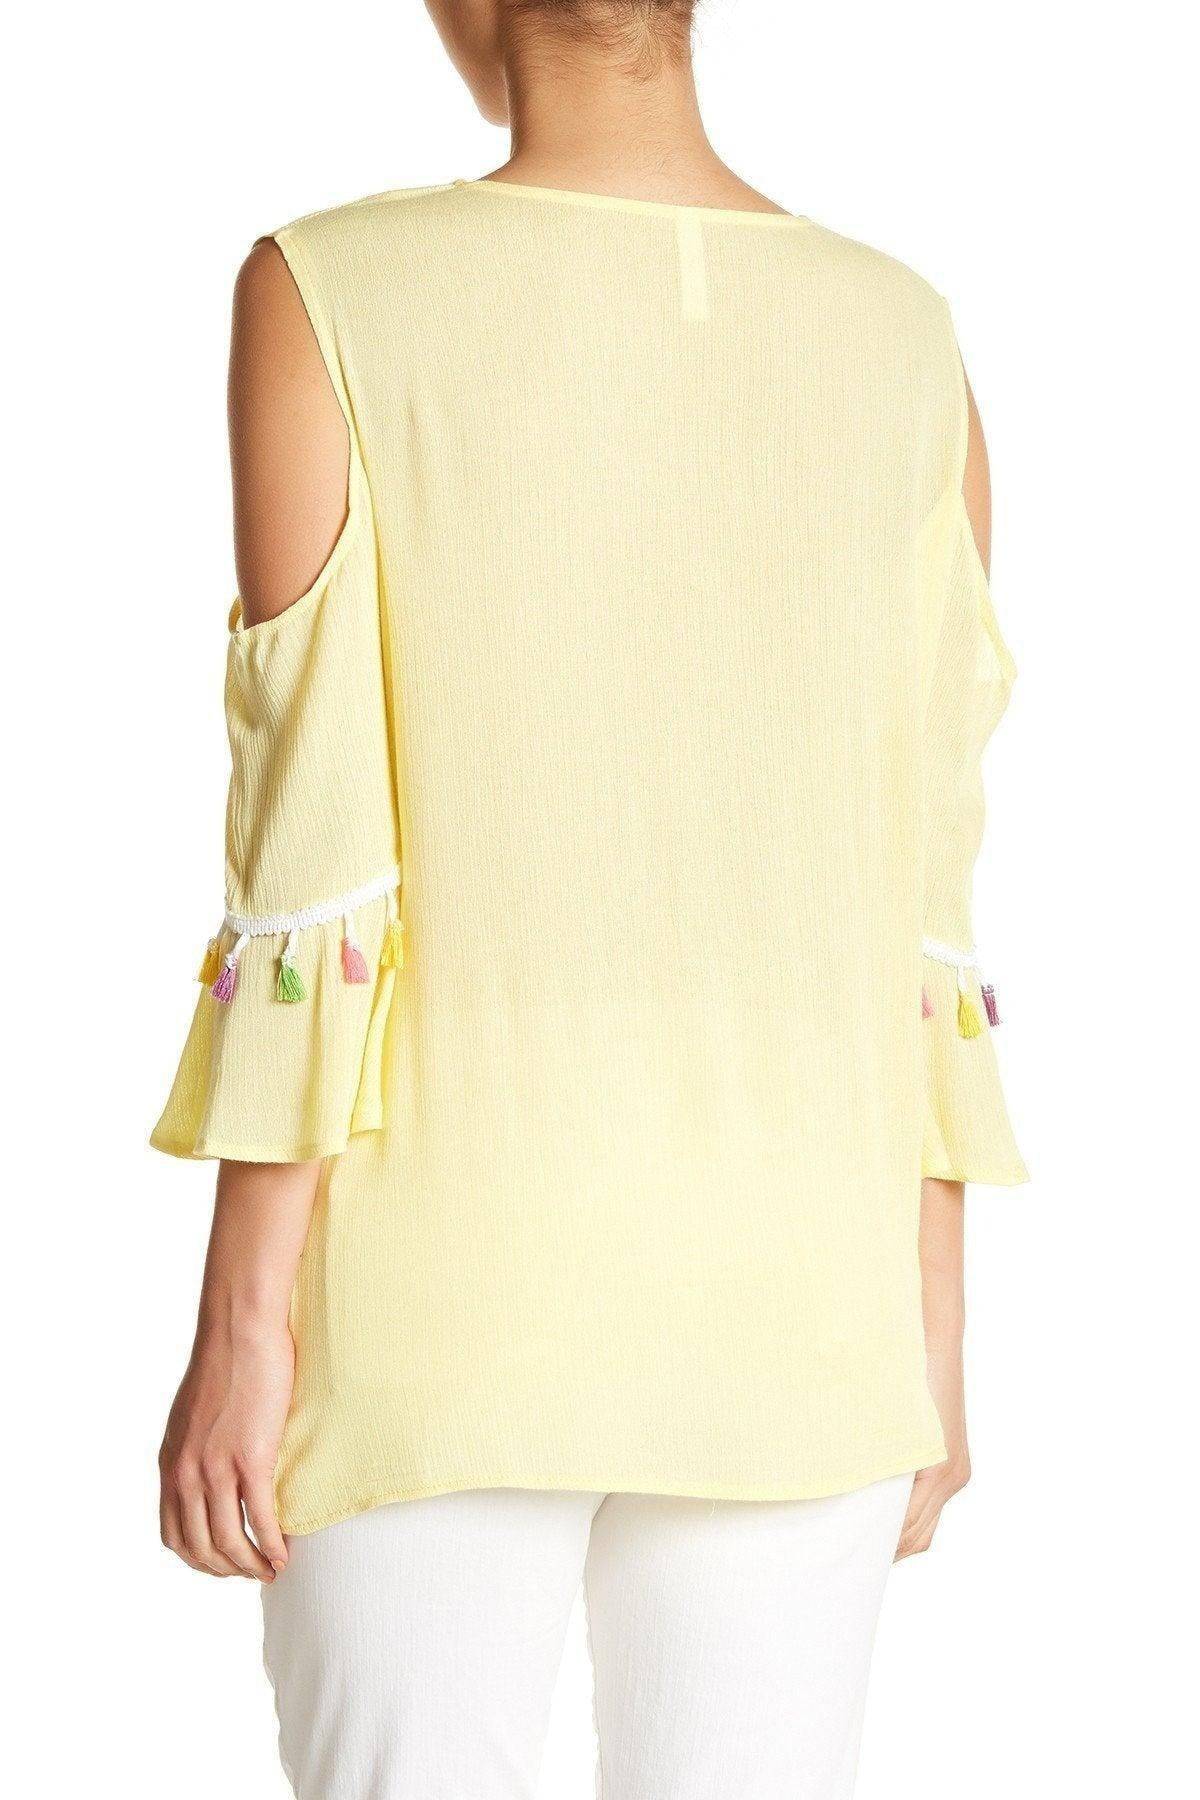 Shop Women's Cold Shoulder Tops for Warm Weather Style